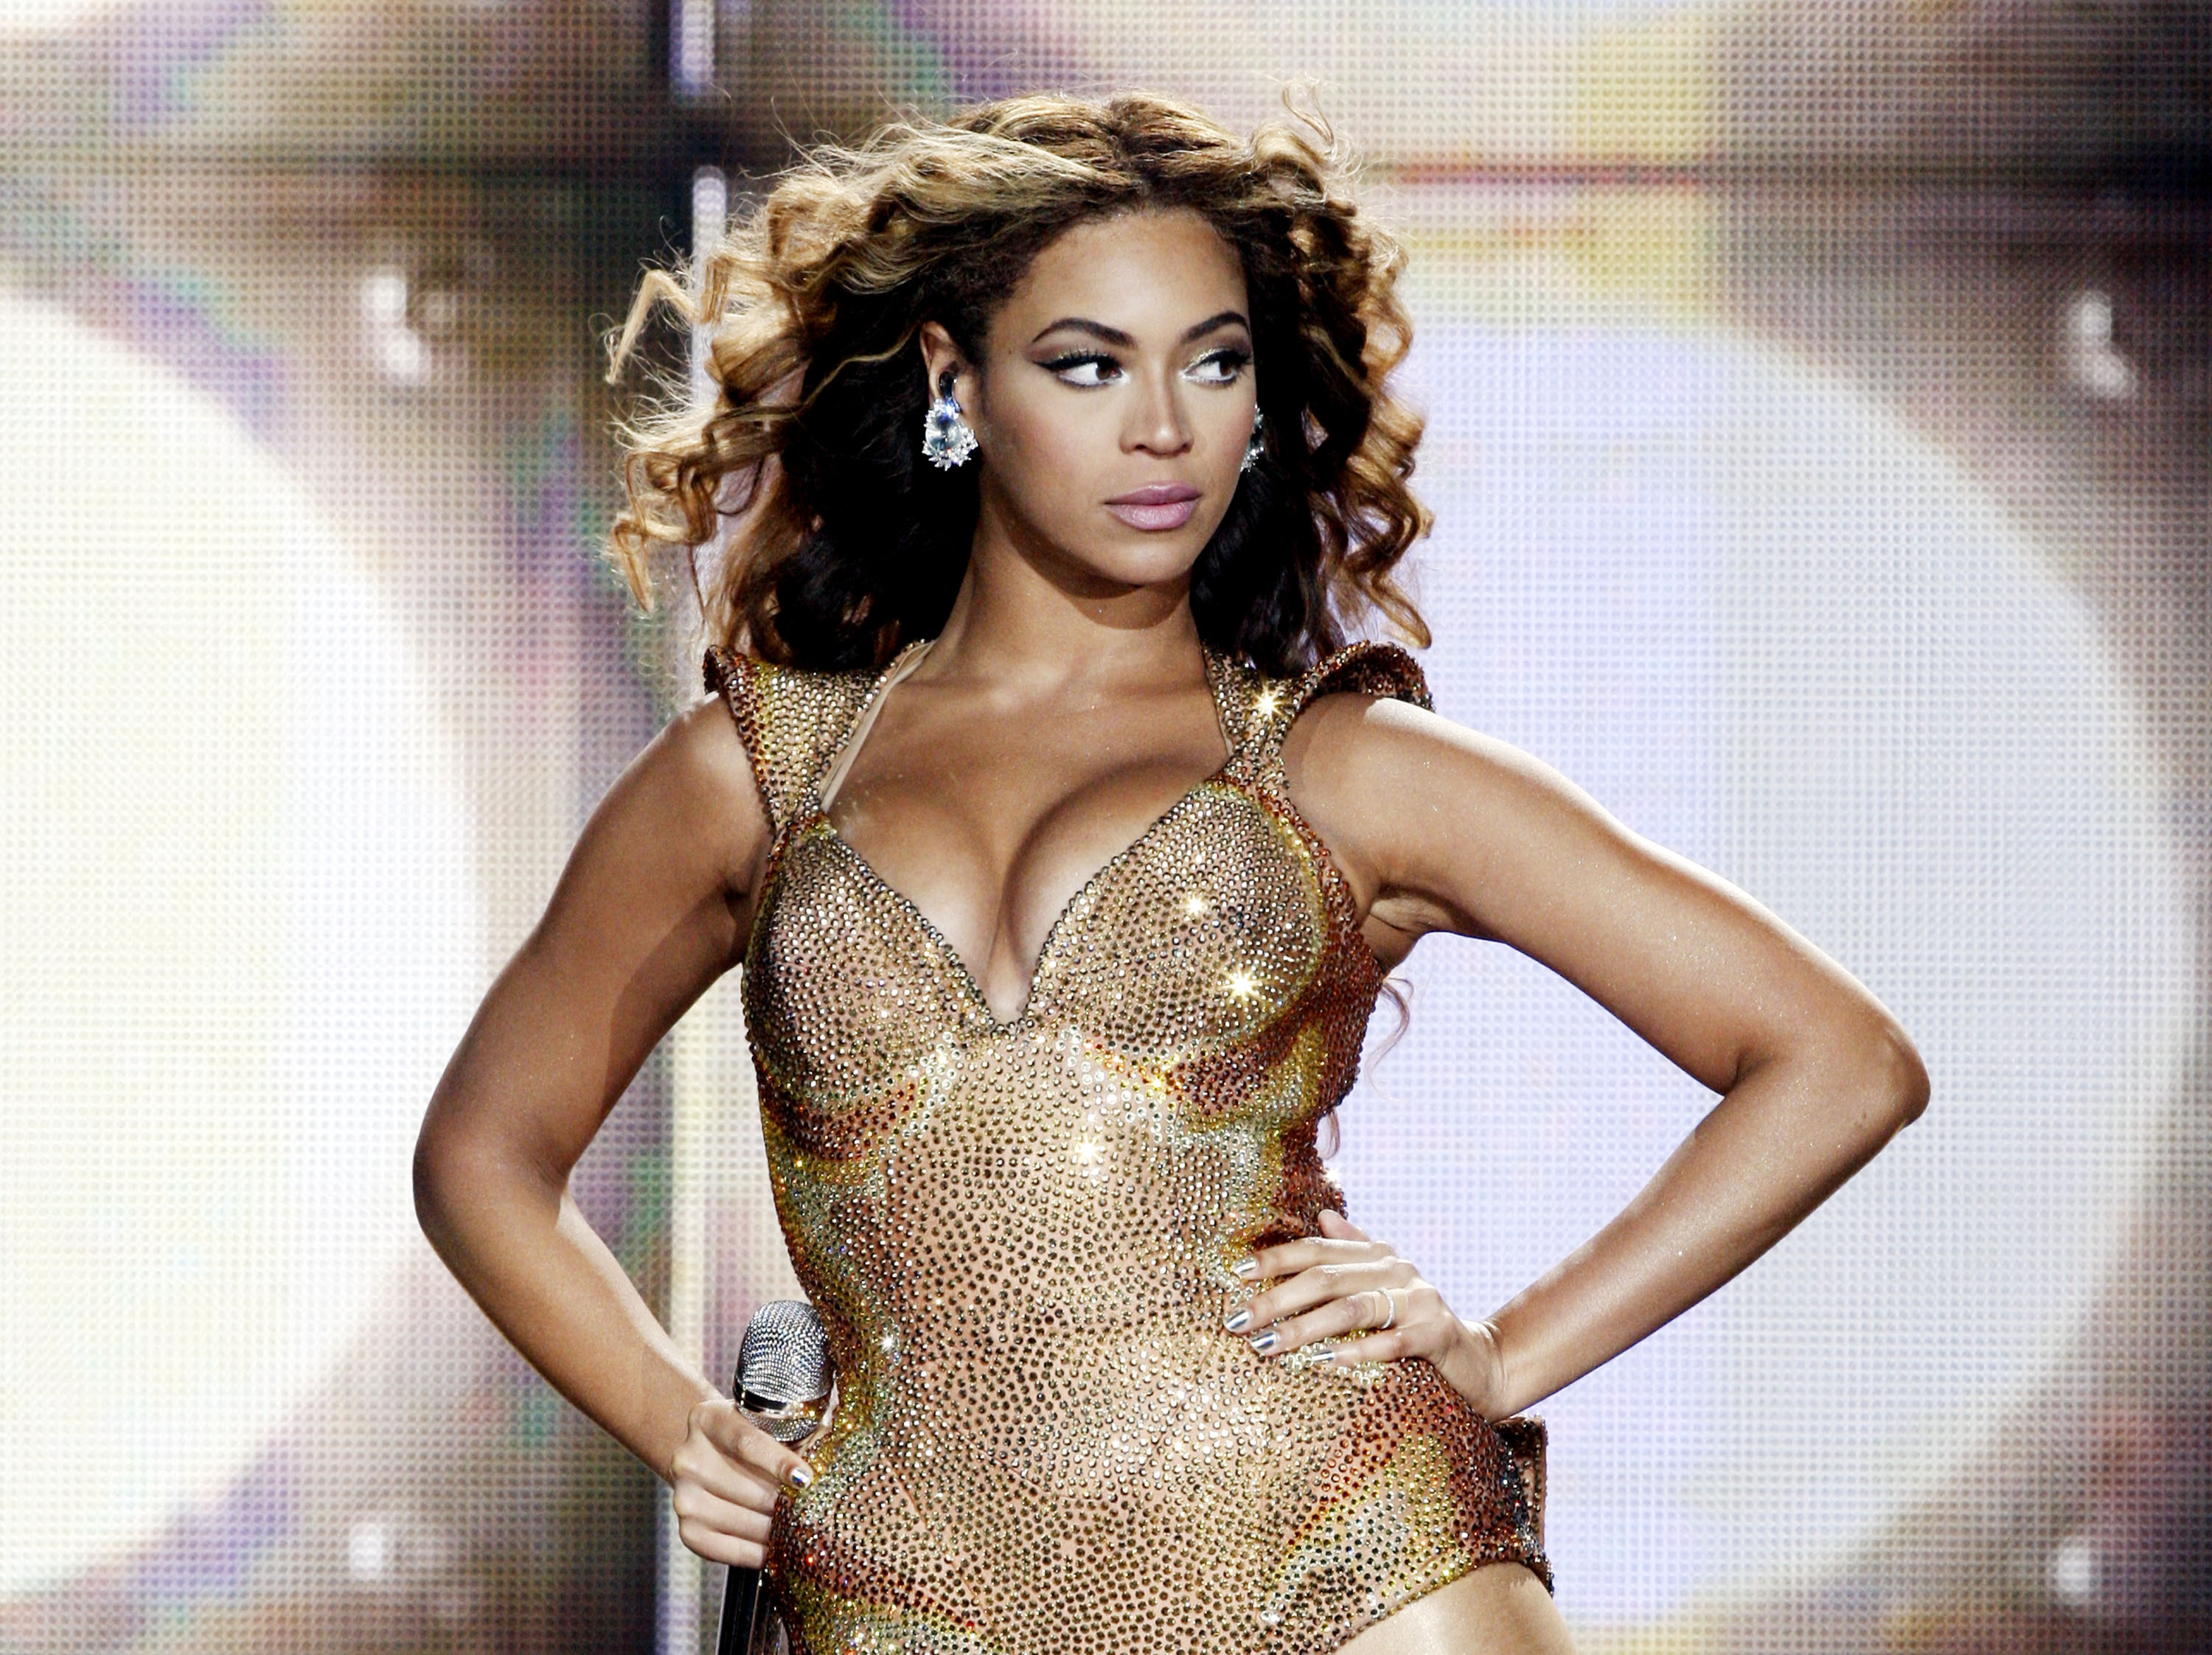 Singer Beyonce performs at the Staples Center on July 13, 2009 in Los Angeles, California | Source: Getty Images